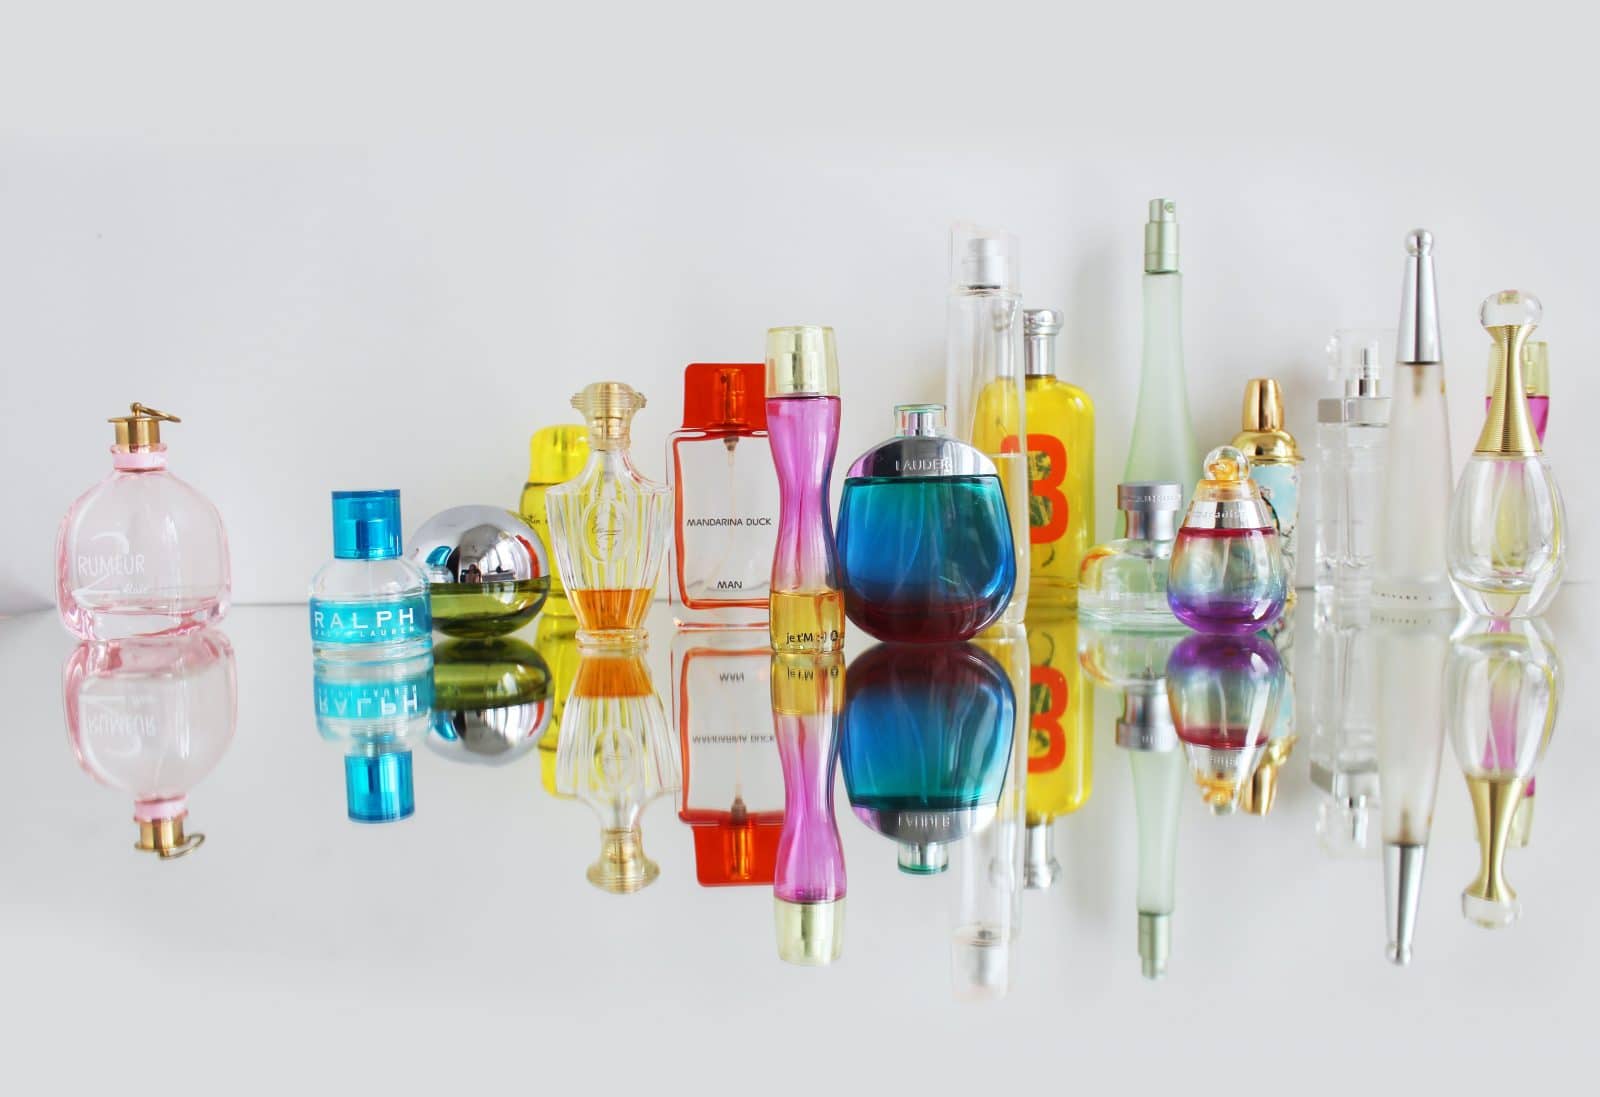 Inter Parfums, Inc. Becomes Fragrance Licensee For Donna Karan And